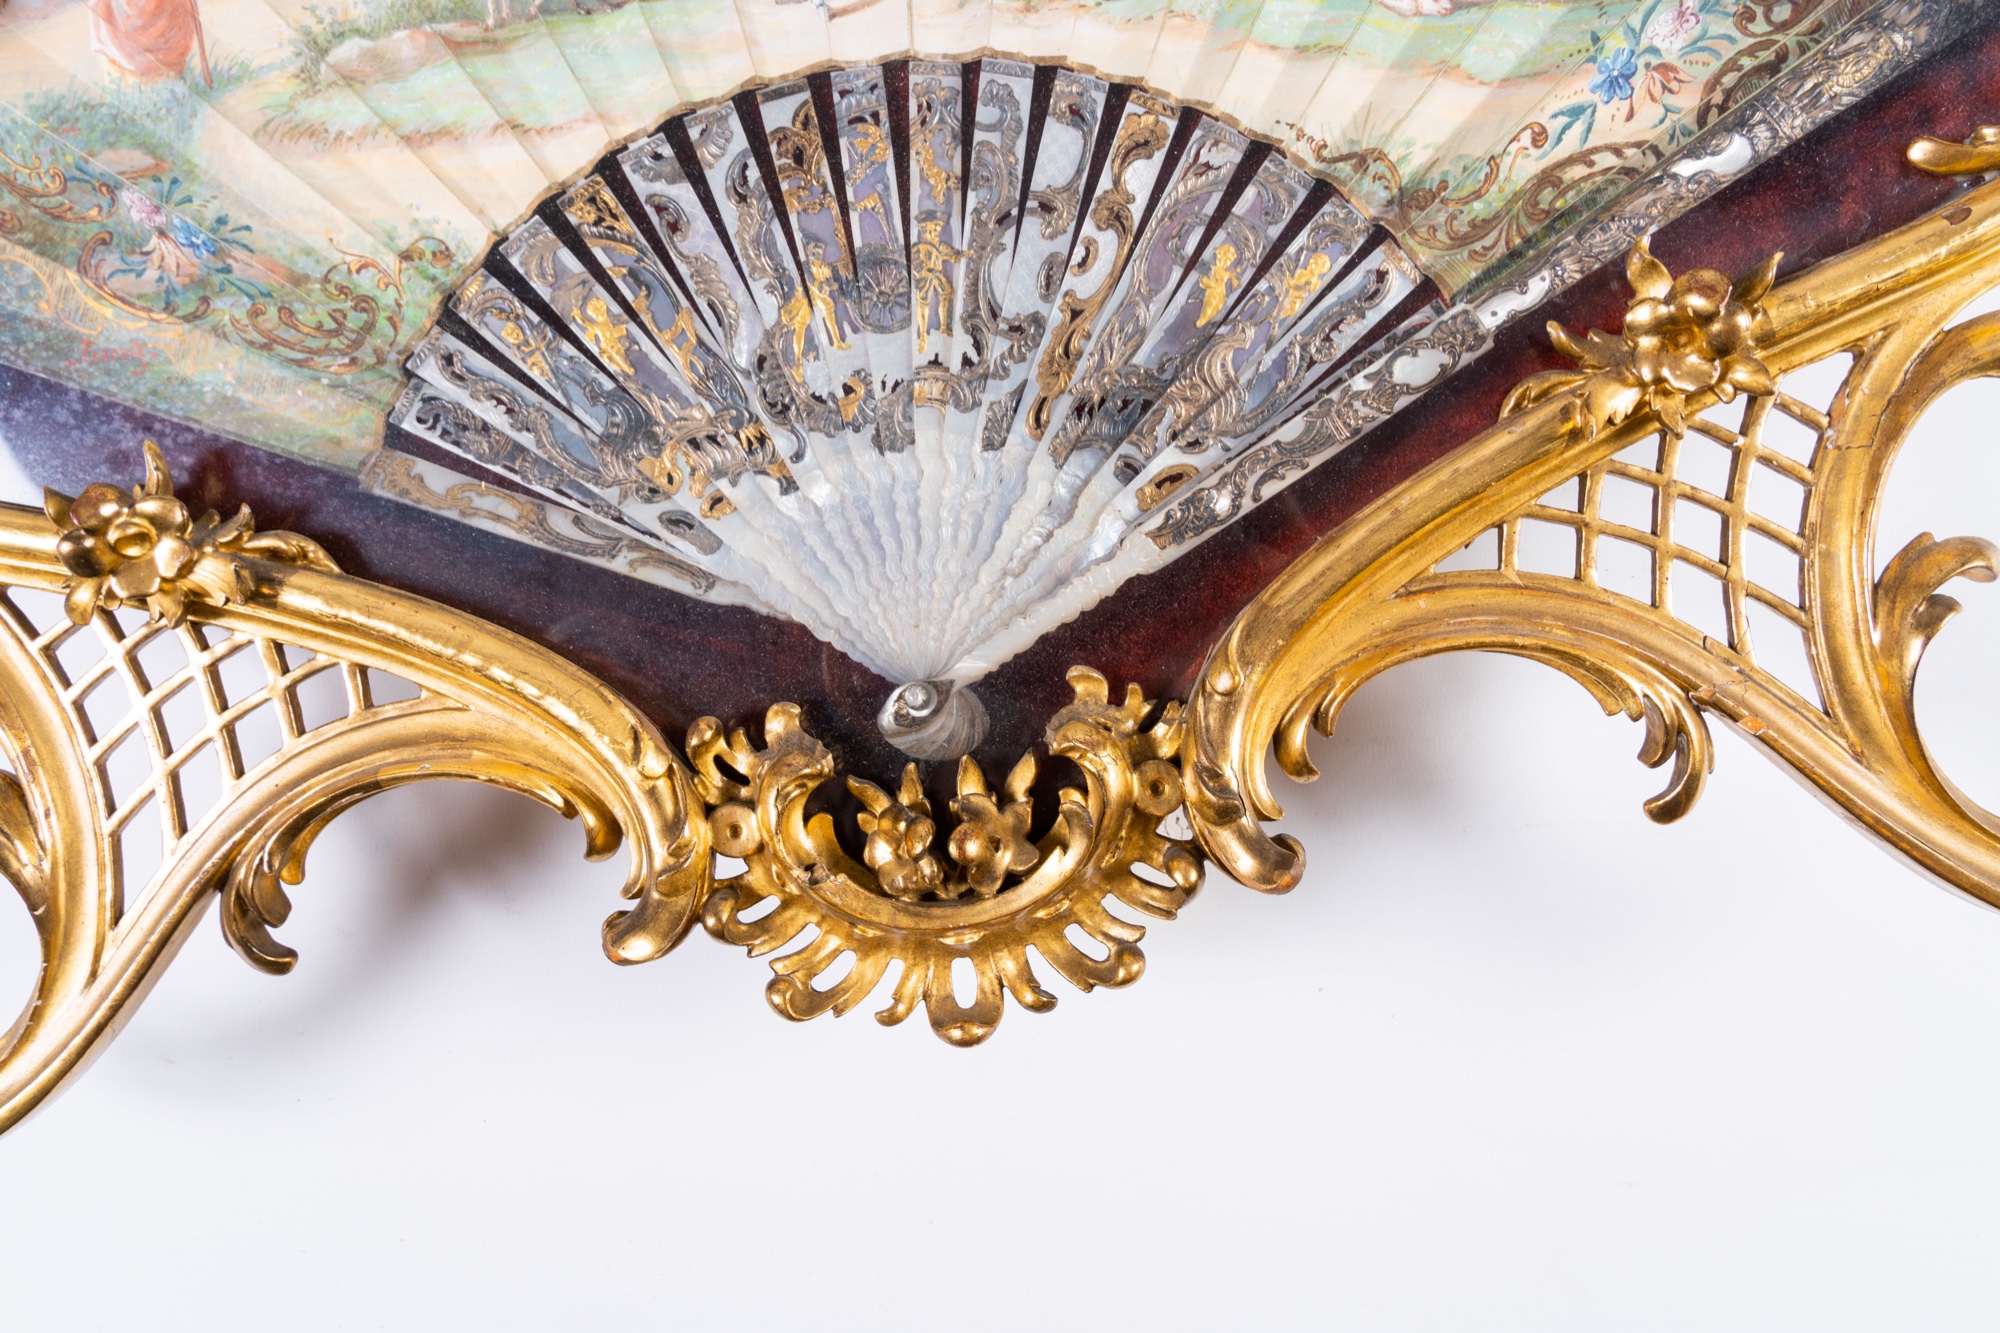 Two finely finished and painted mother-of-pearl, tortoiseshell and silk fans with a gallant scene an - Image 7 of 13